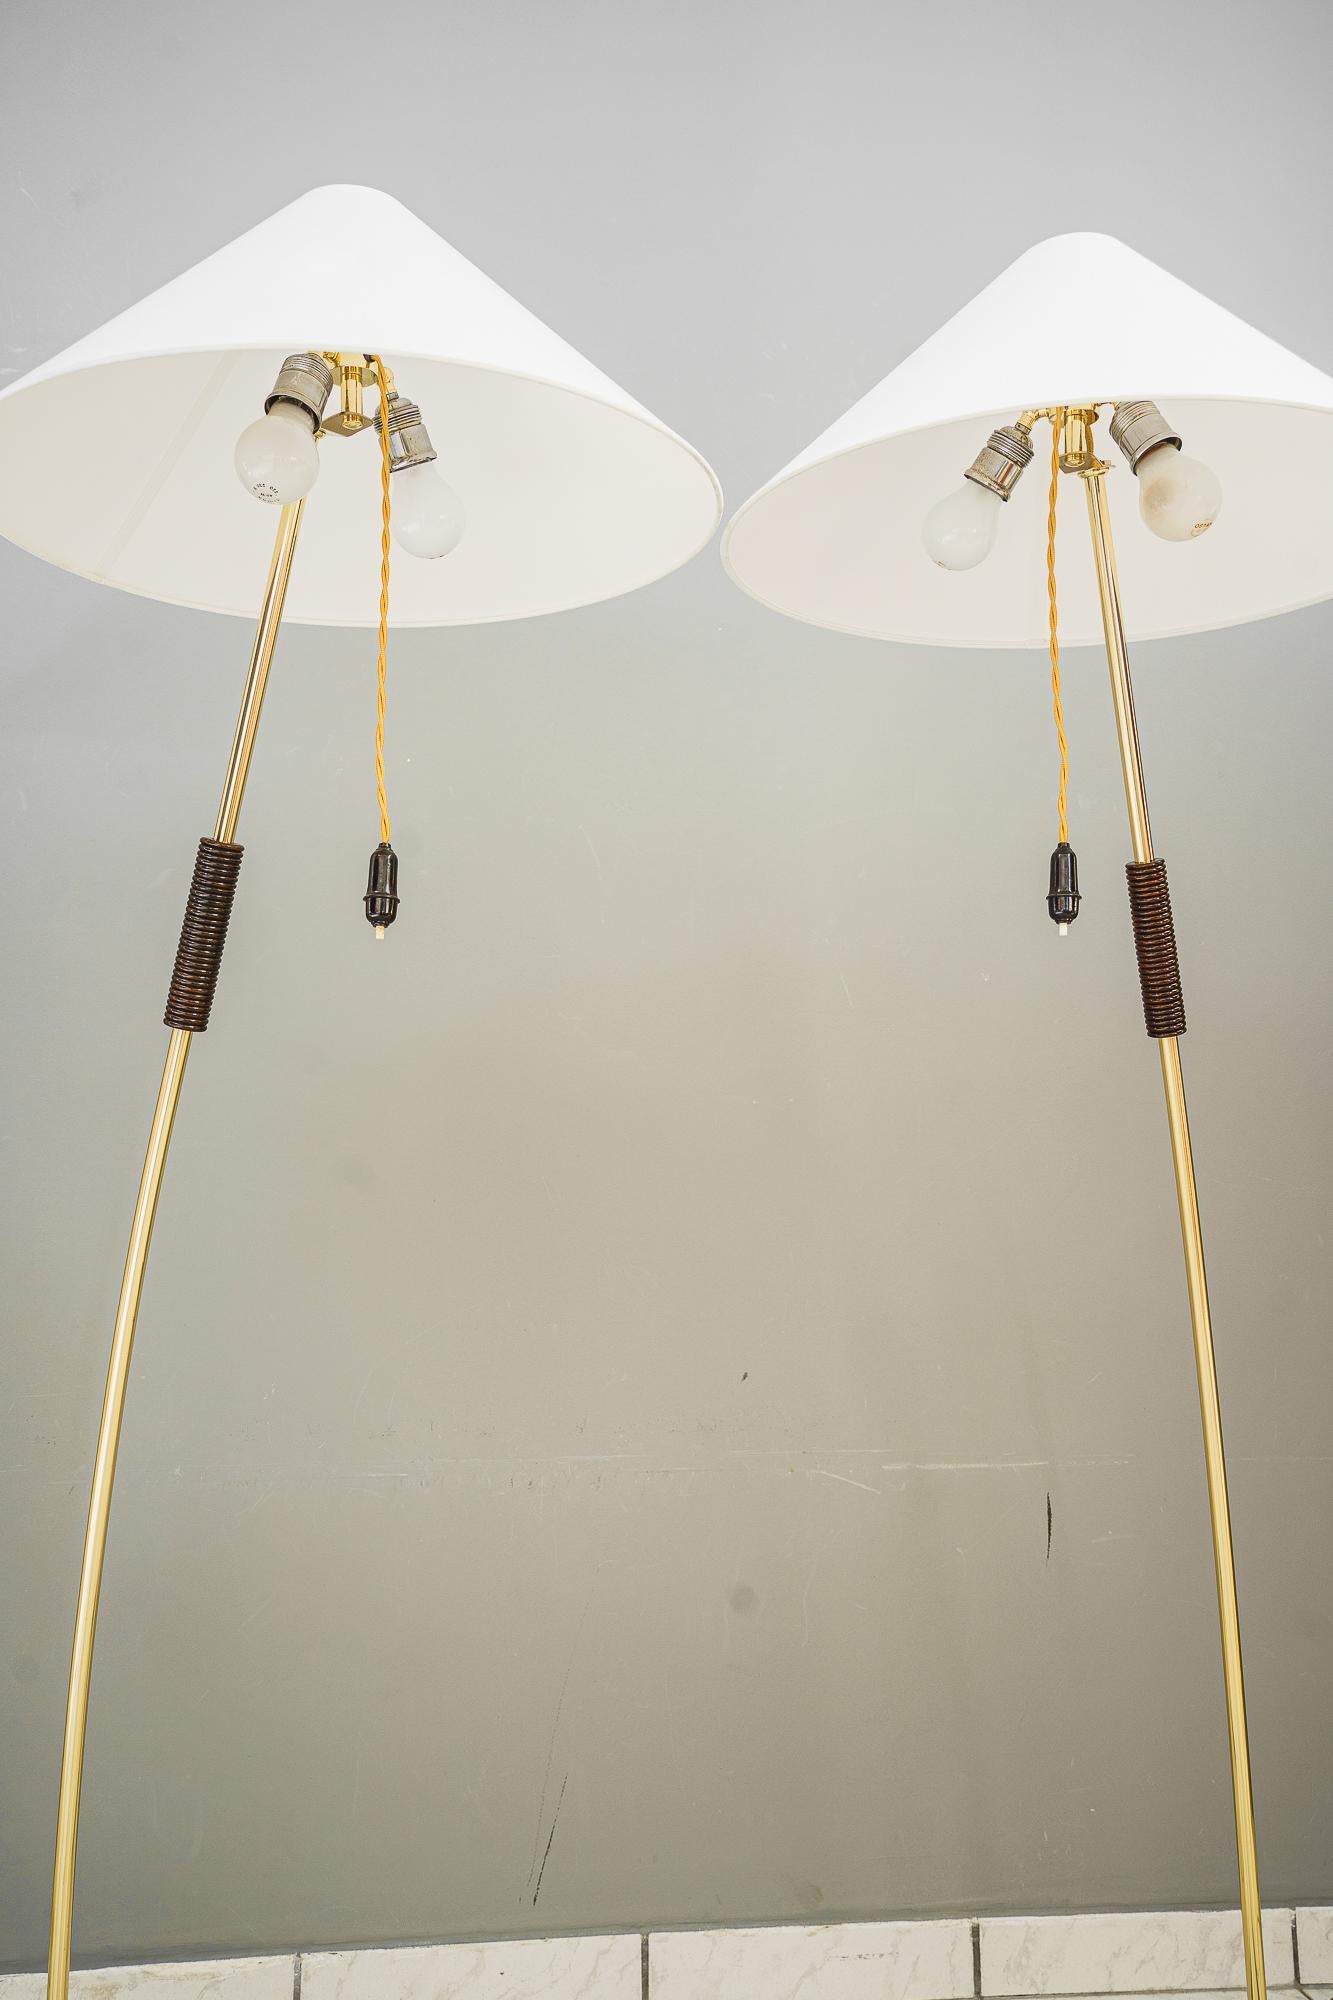 2x Rupert Nikoll Floor Lamps with Wood Handle, circa 1950s In Good Condition For Sale In Wien, AT